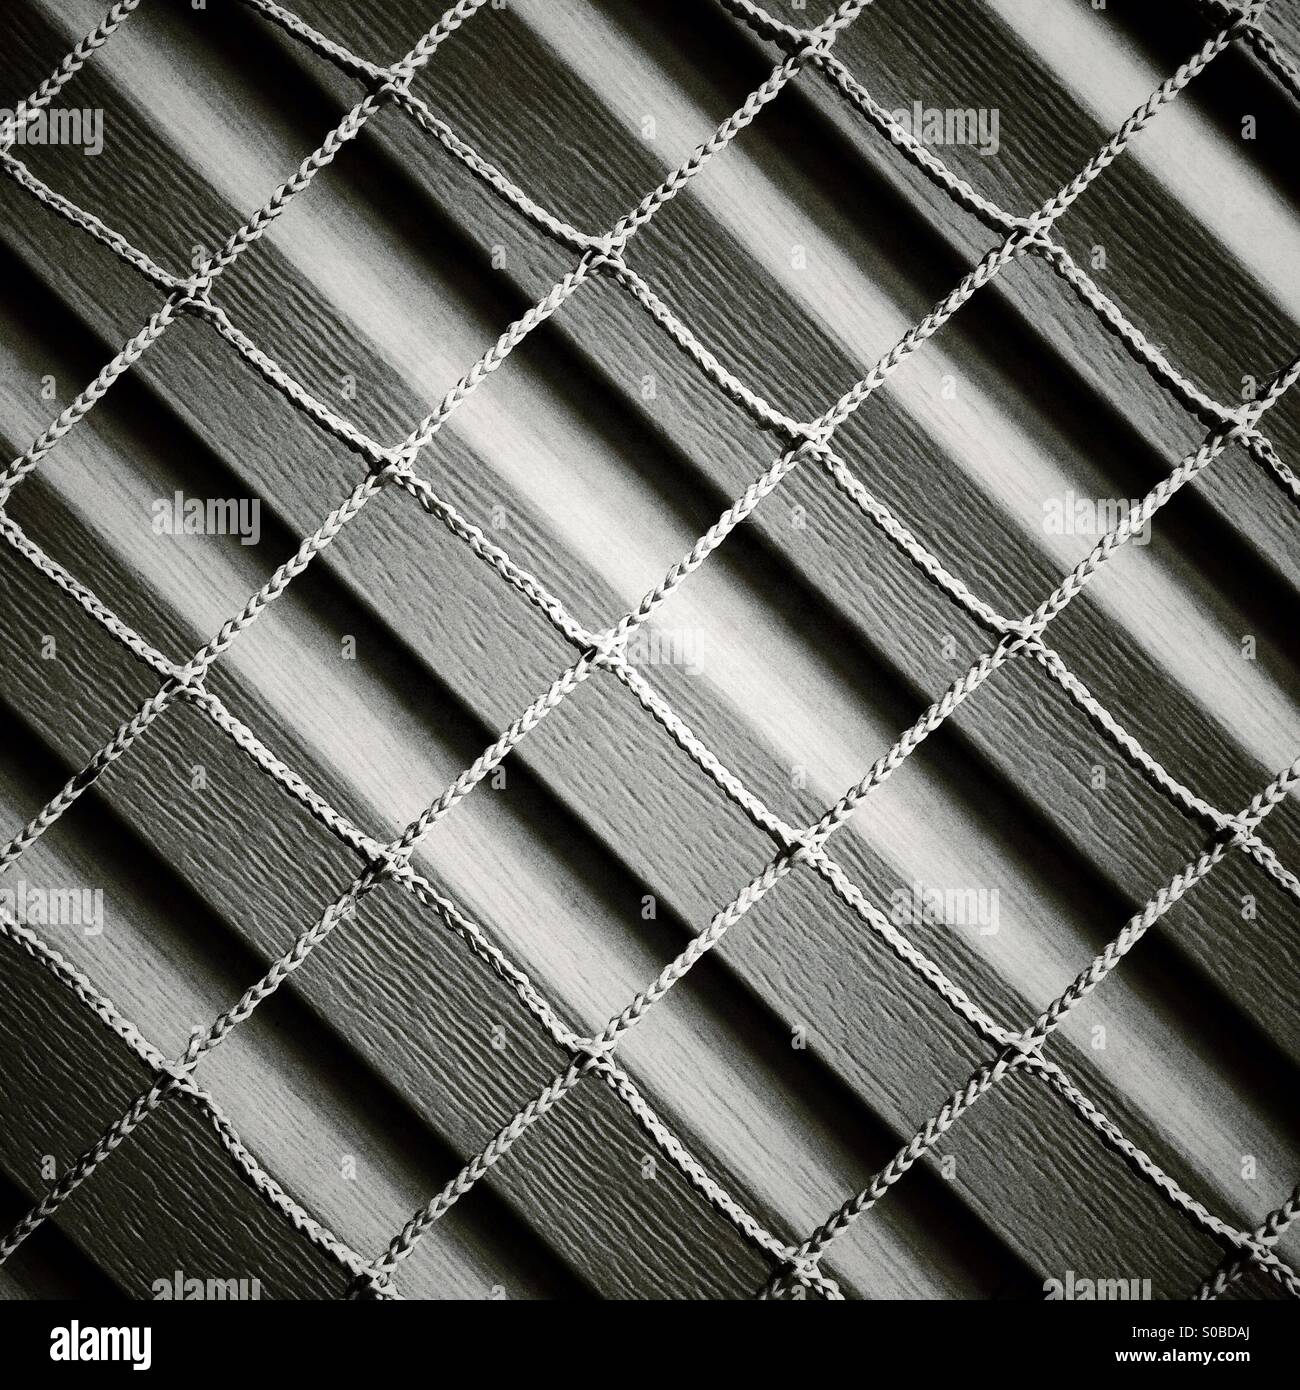 Abstract taken from a hockey net against the siding of a house. Stock Photo